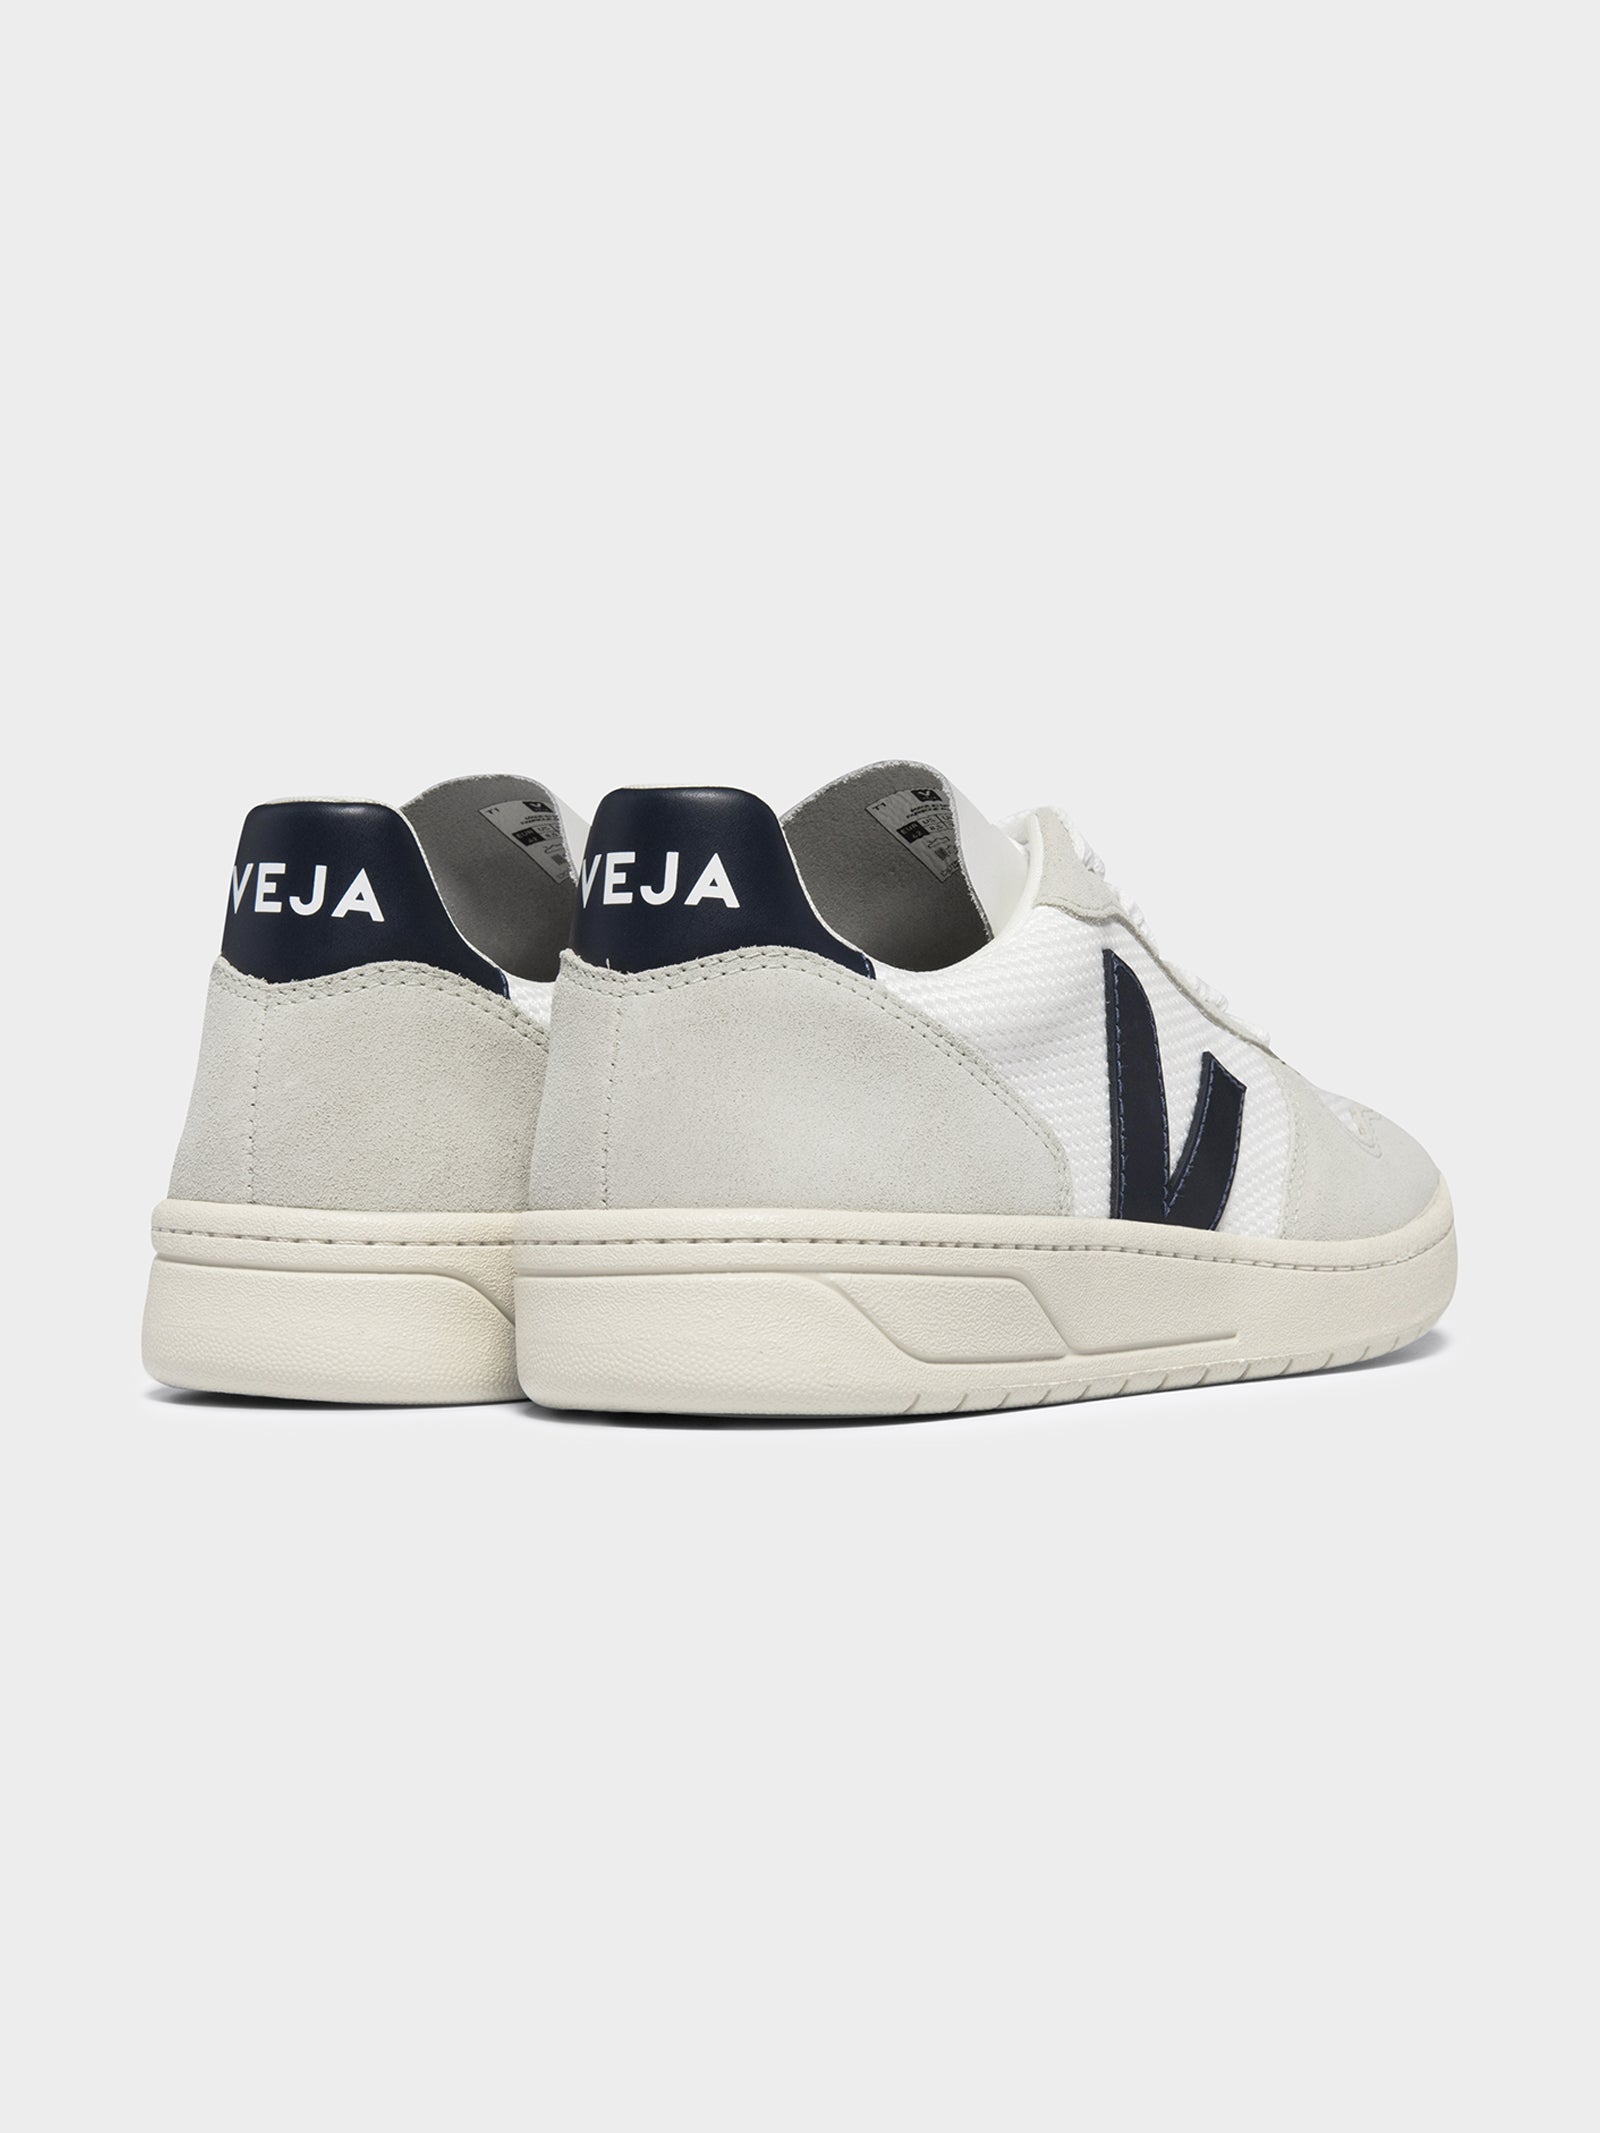 Mens V10 Leather Suede Sneakers in White & Navy